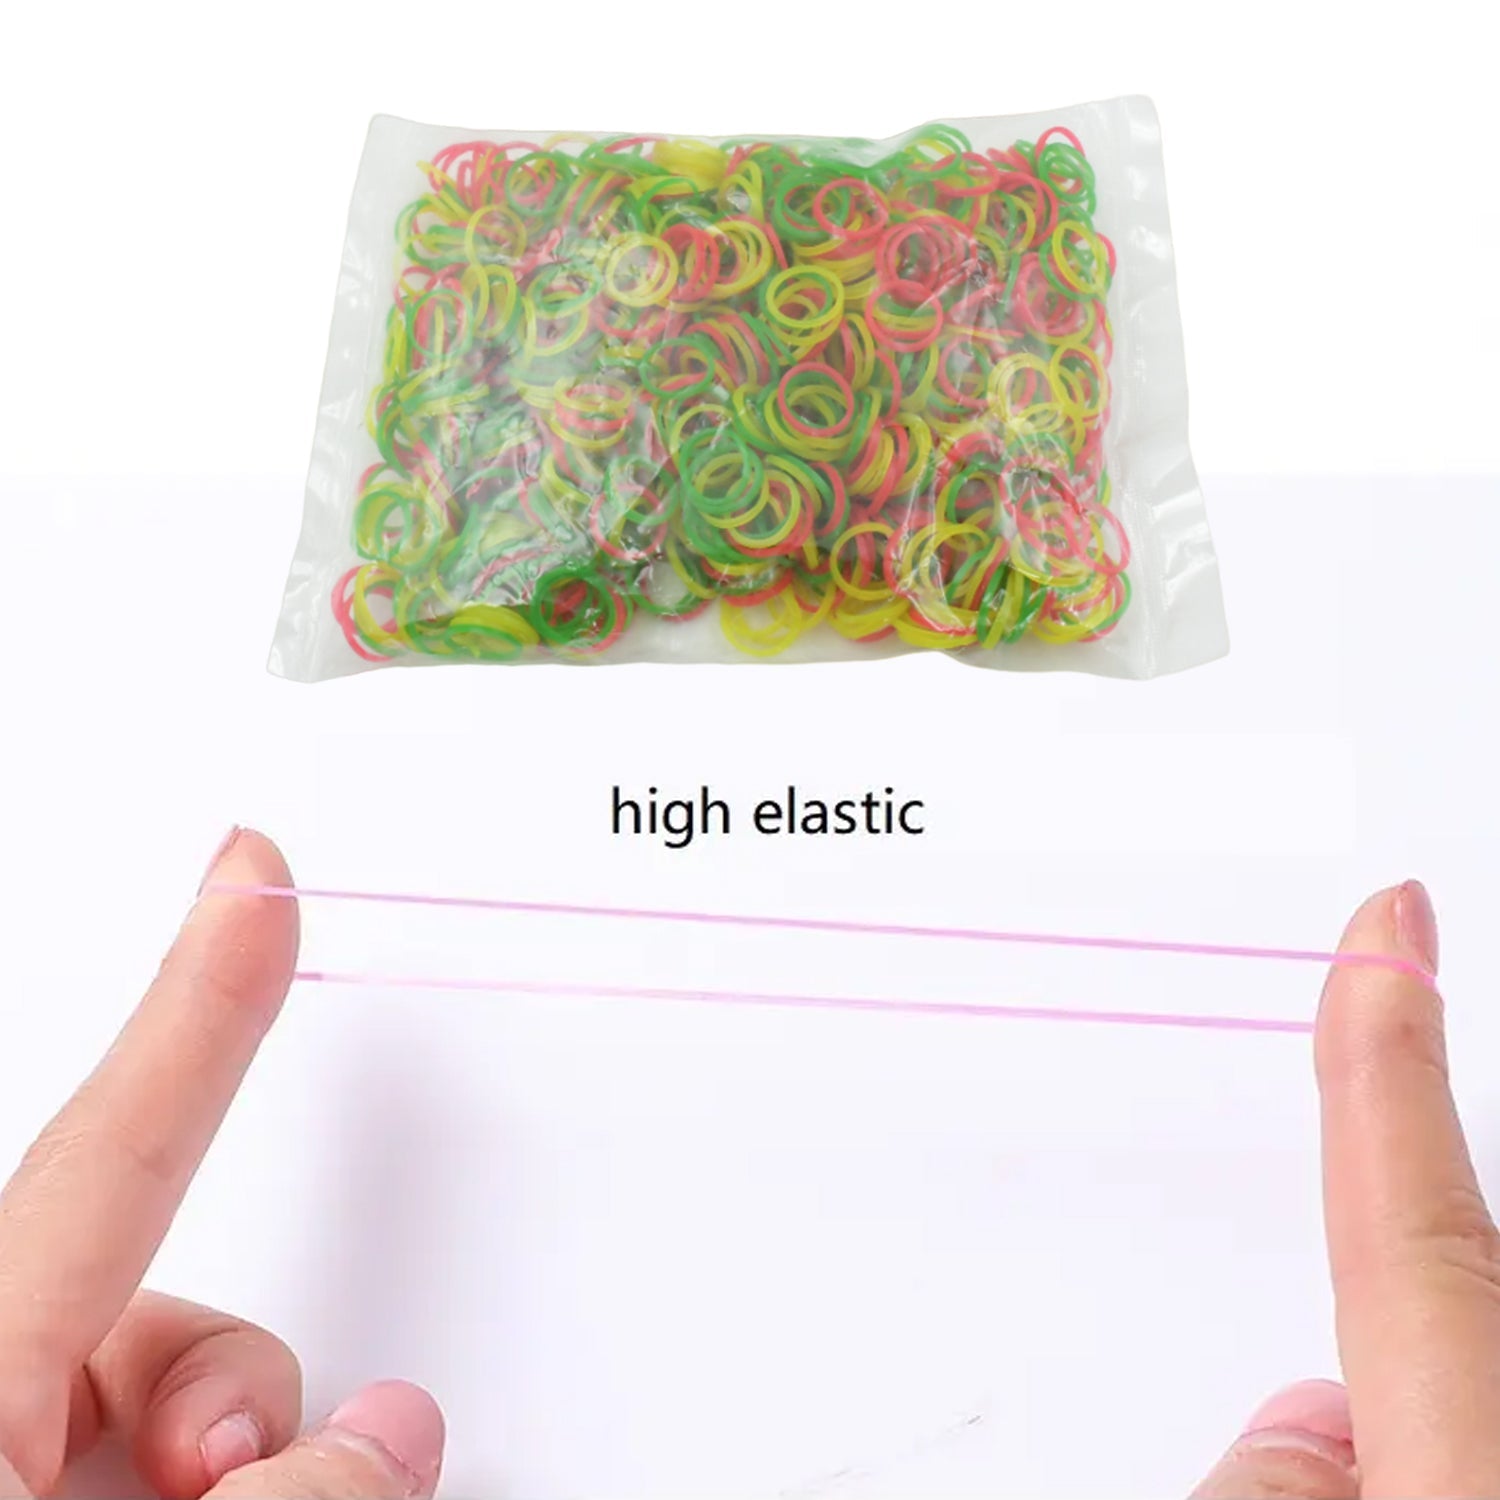 4354 RUBBER BAND FOR OFFICE/HOME AND KITCHEN ACCESSORIES ITEM PRODUCTS, ELASTIC RUBBER BANDS, FLEXIBLE REUSABLE NYLON ELASTIC UNBREAKABLE, FOR STATIONERY, SCHOOL MULTICOLOR (0.5 Inch / 50 Gm)